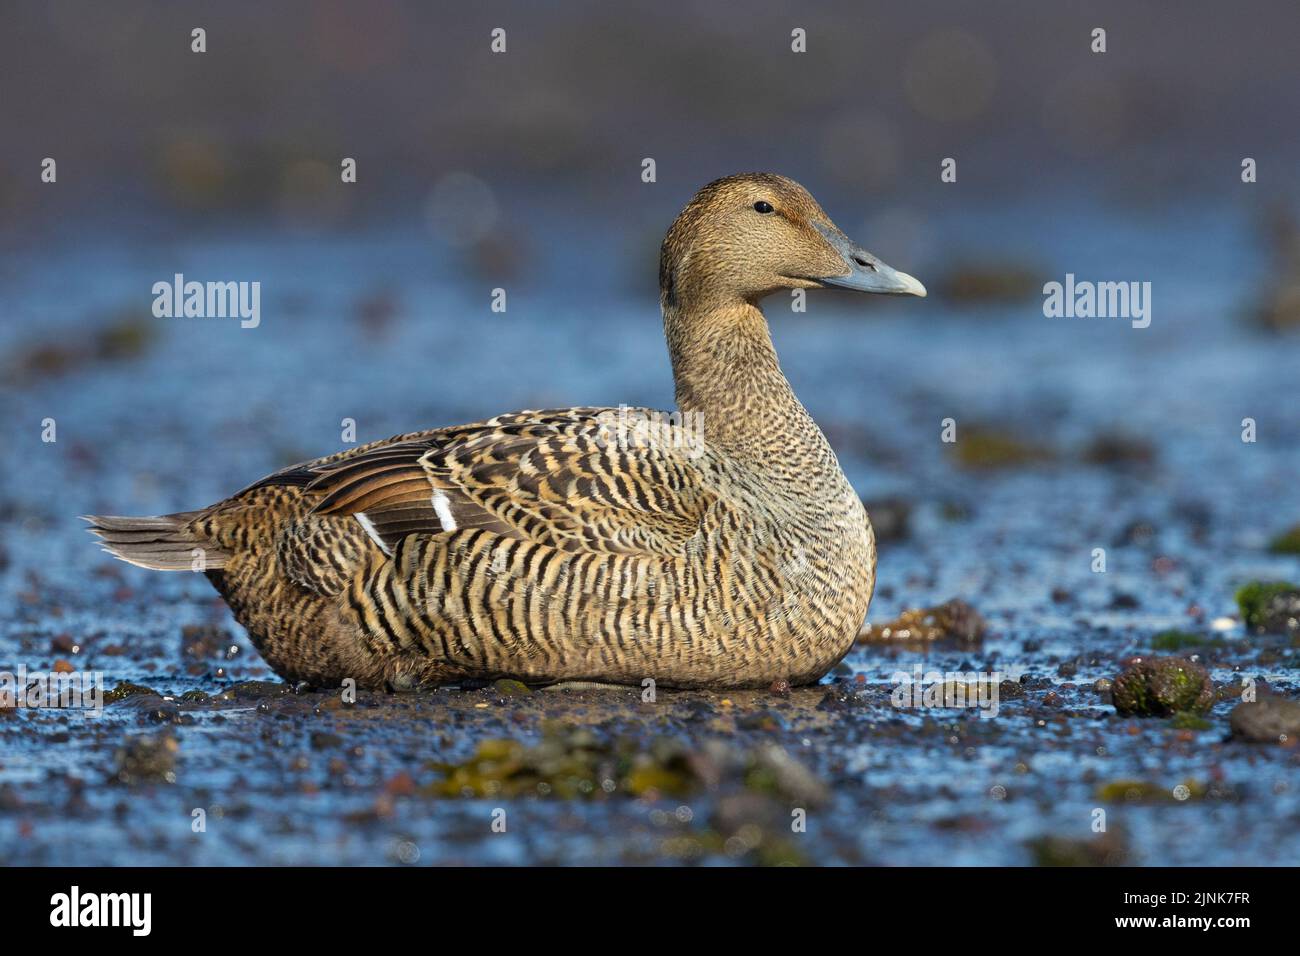 Common Eider (Somateria mollissima borealis), side view of an adult female crouched on the ground, Southern Region, Iceland Stock Photo